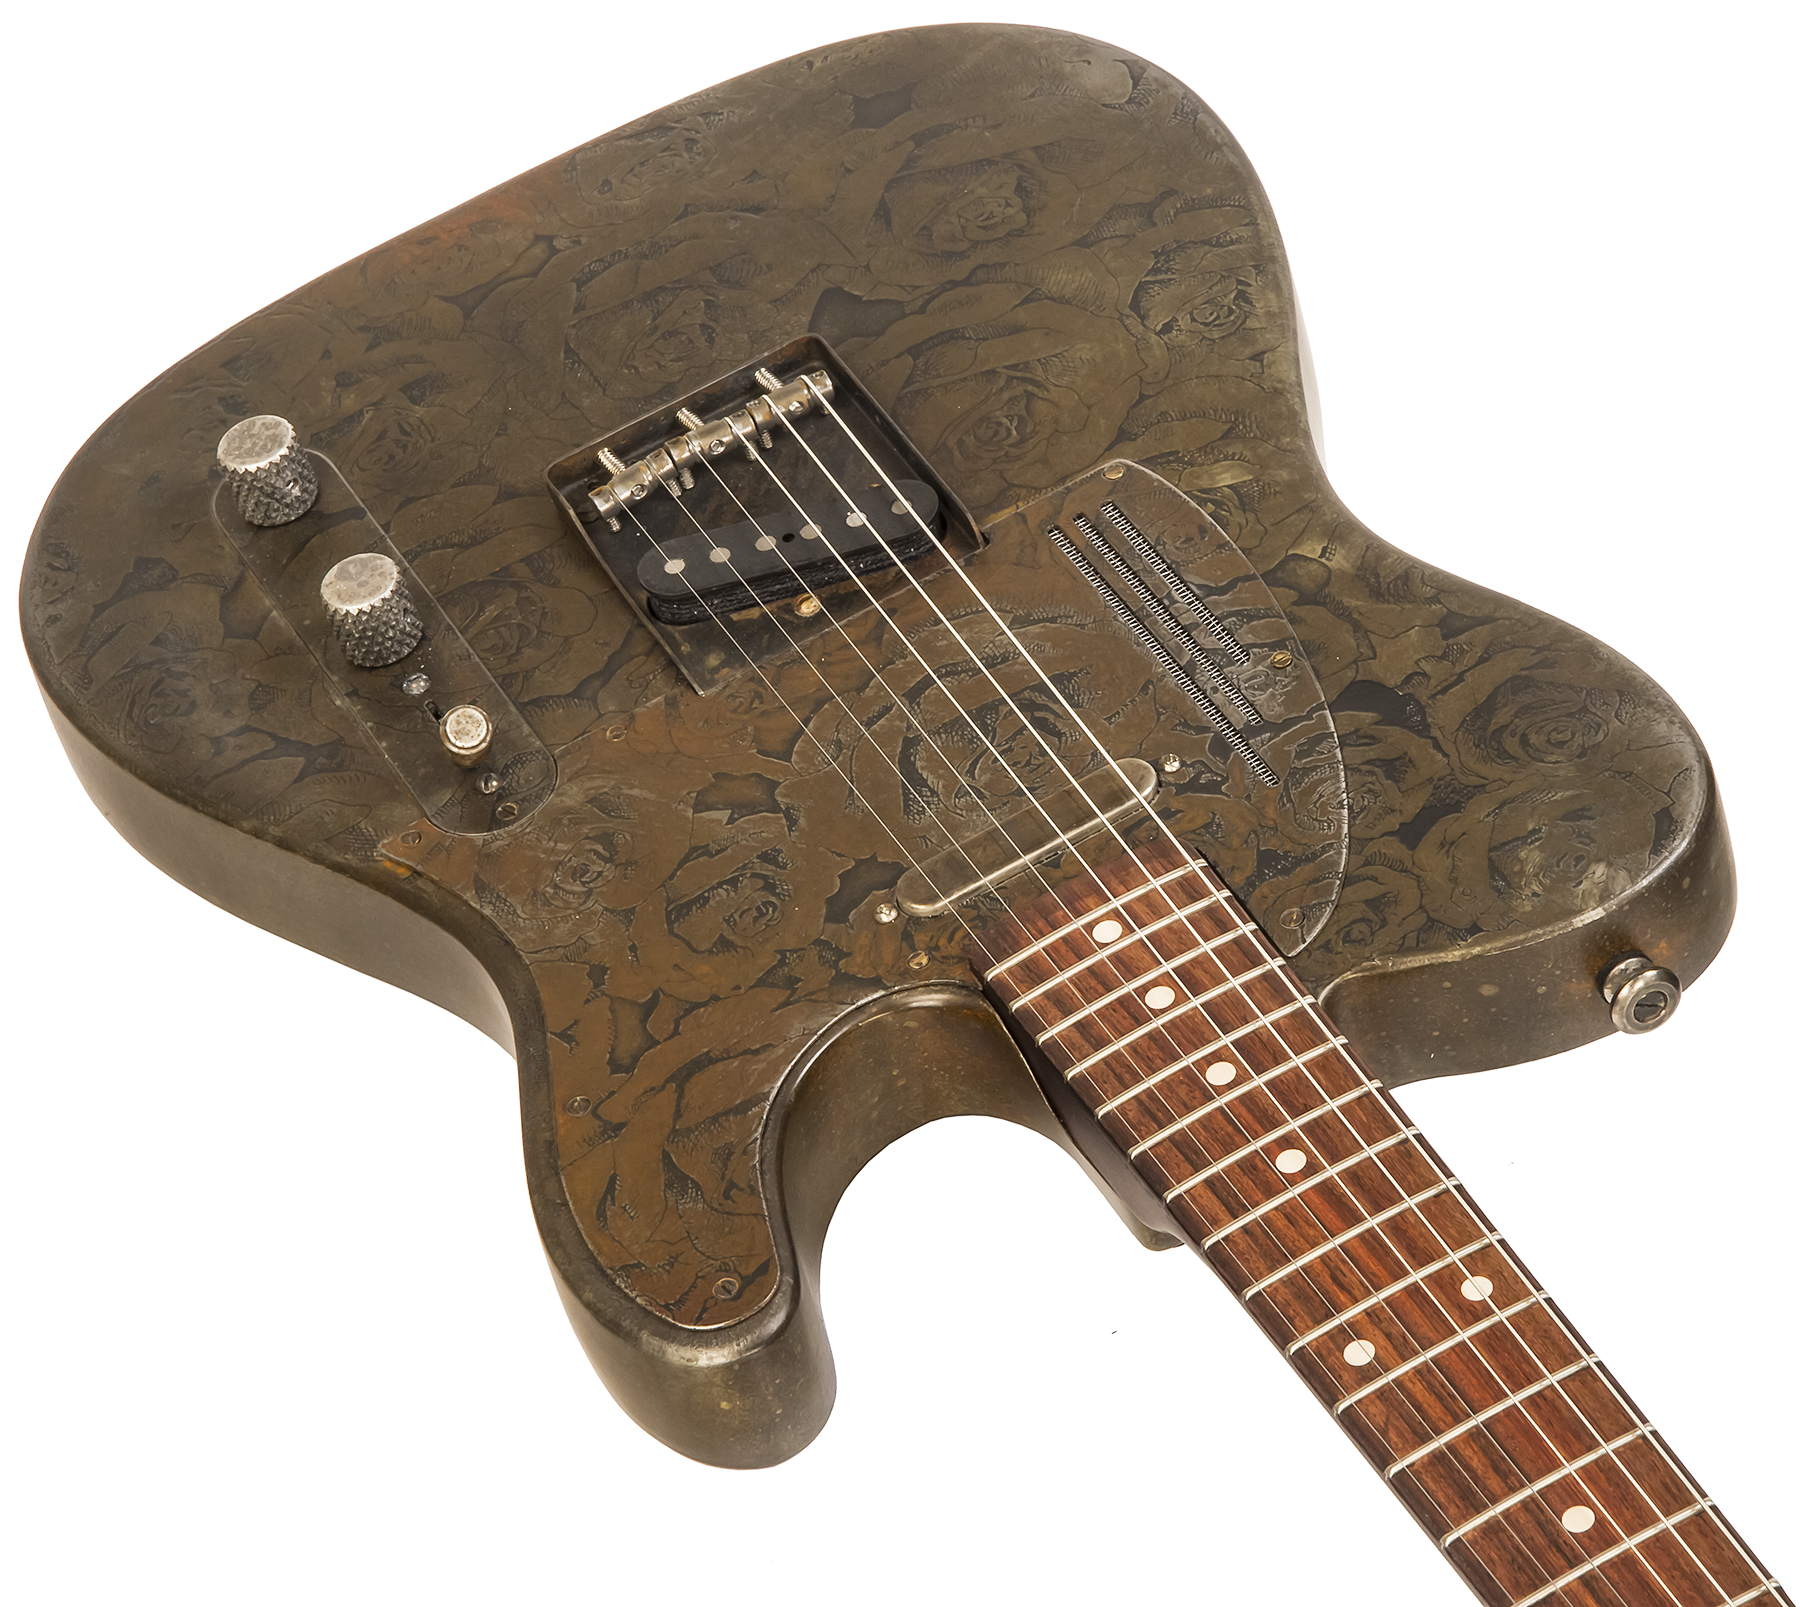 James Trussart Steelcaster Perf.back 2s Ht Rw #21000 - Rusty Roses - Semi-hollow electric guitar - Variation 1